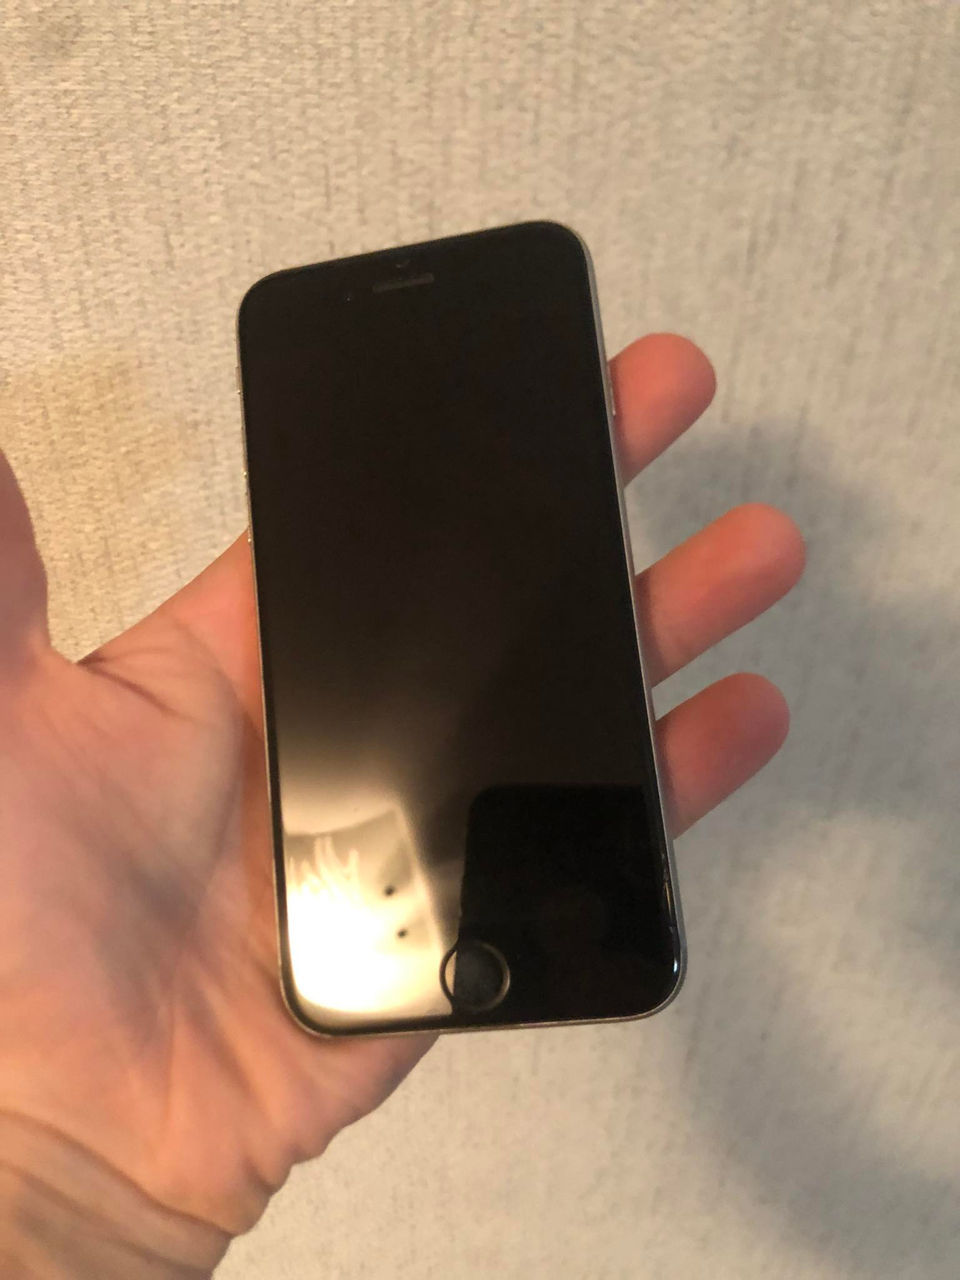 IPhone 6 64 Gb space gray